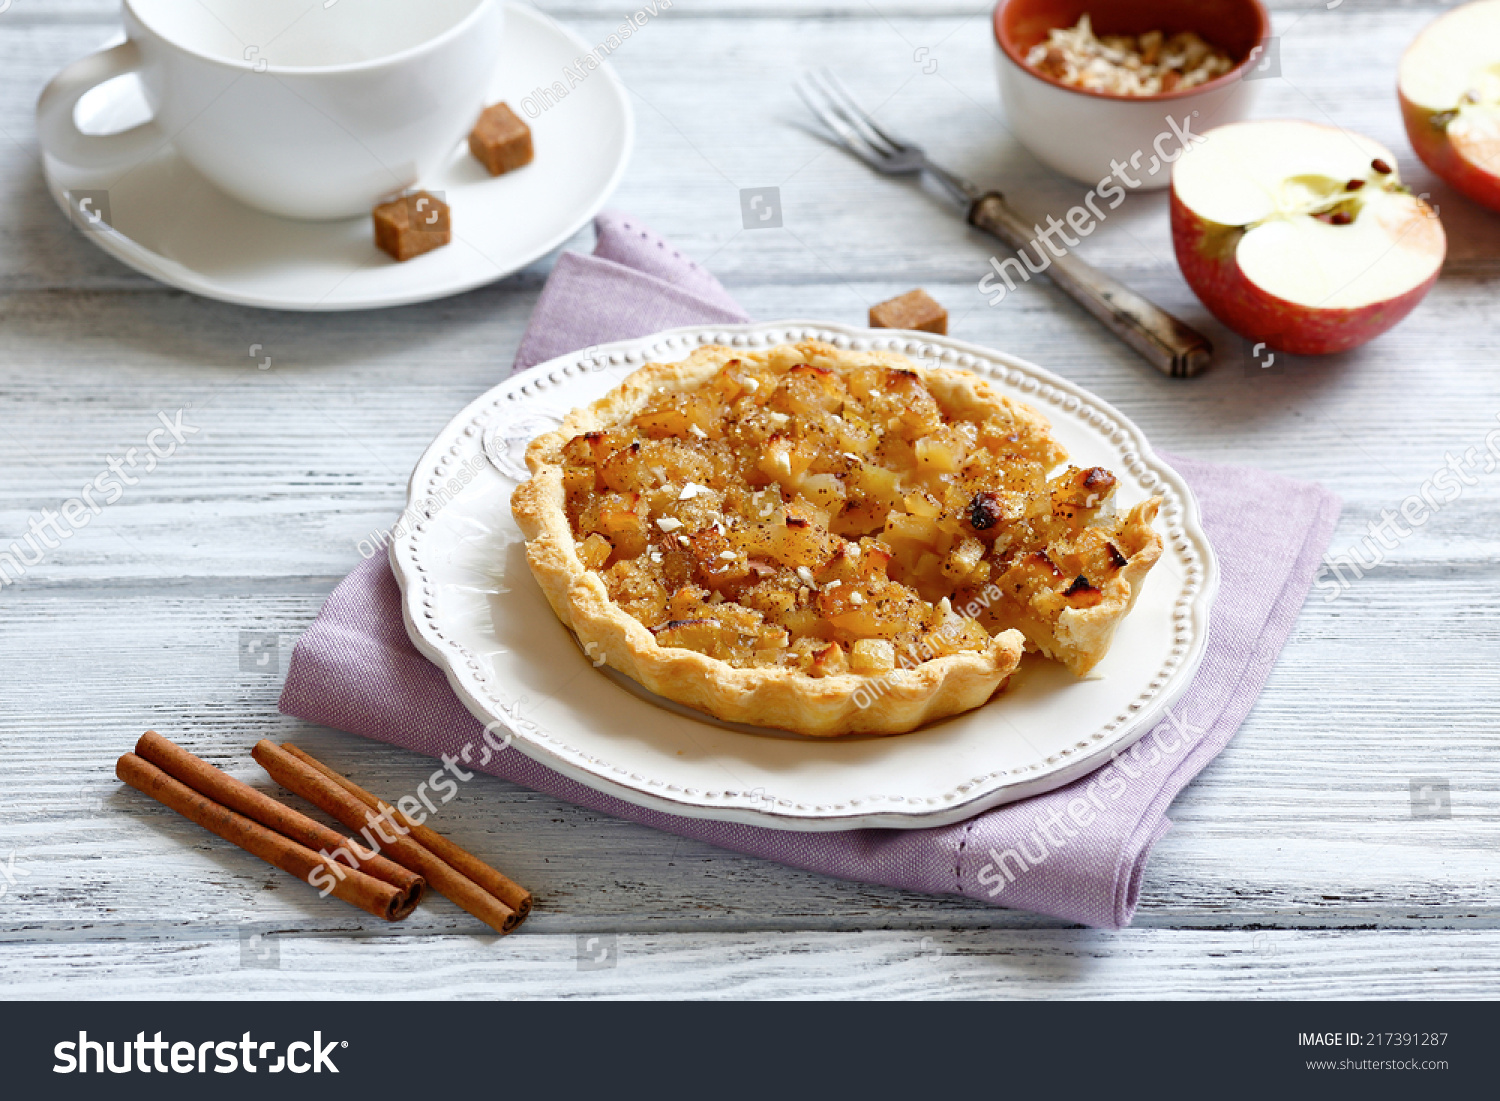 Crispytart with apples and sugar on white plate #217391287